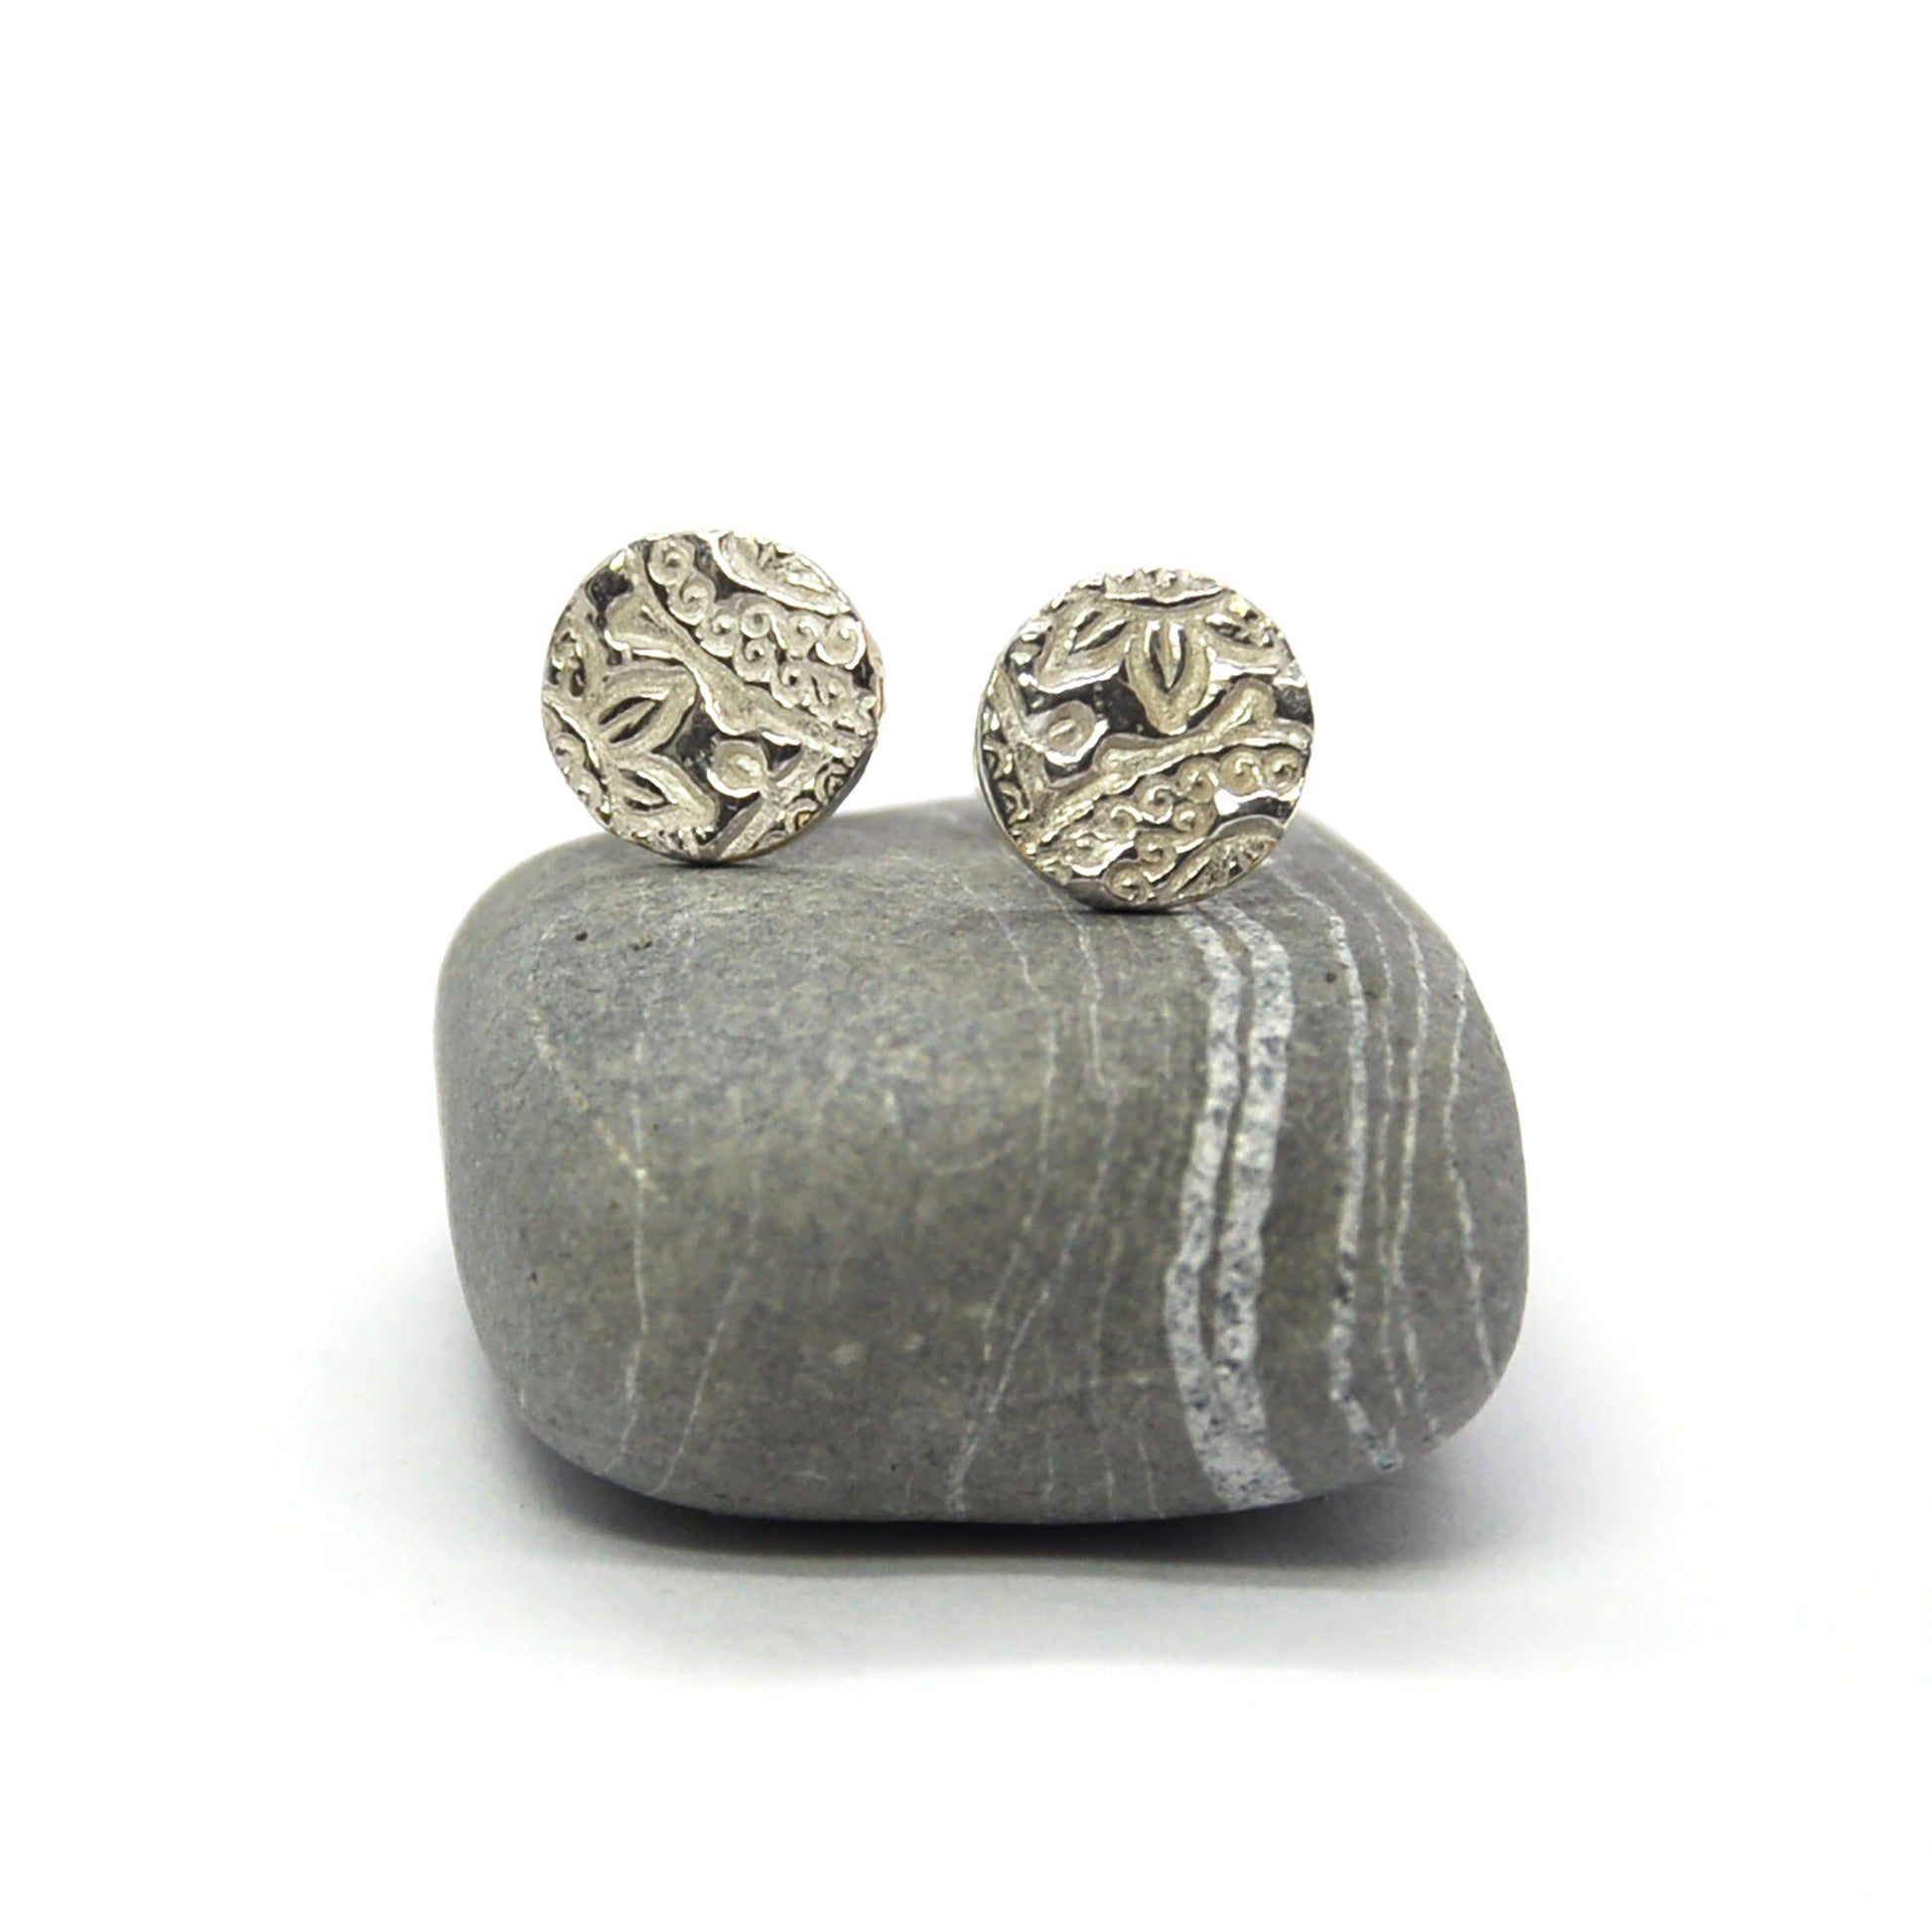 Round silver stud earrings with pattern on stone